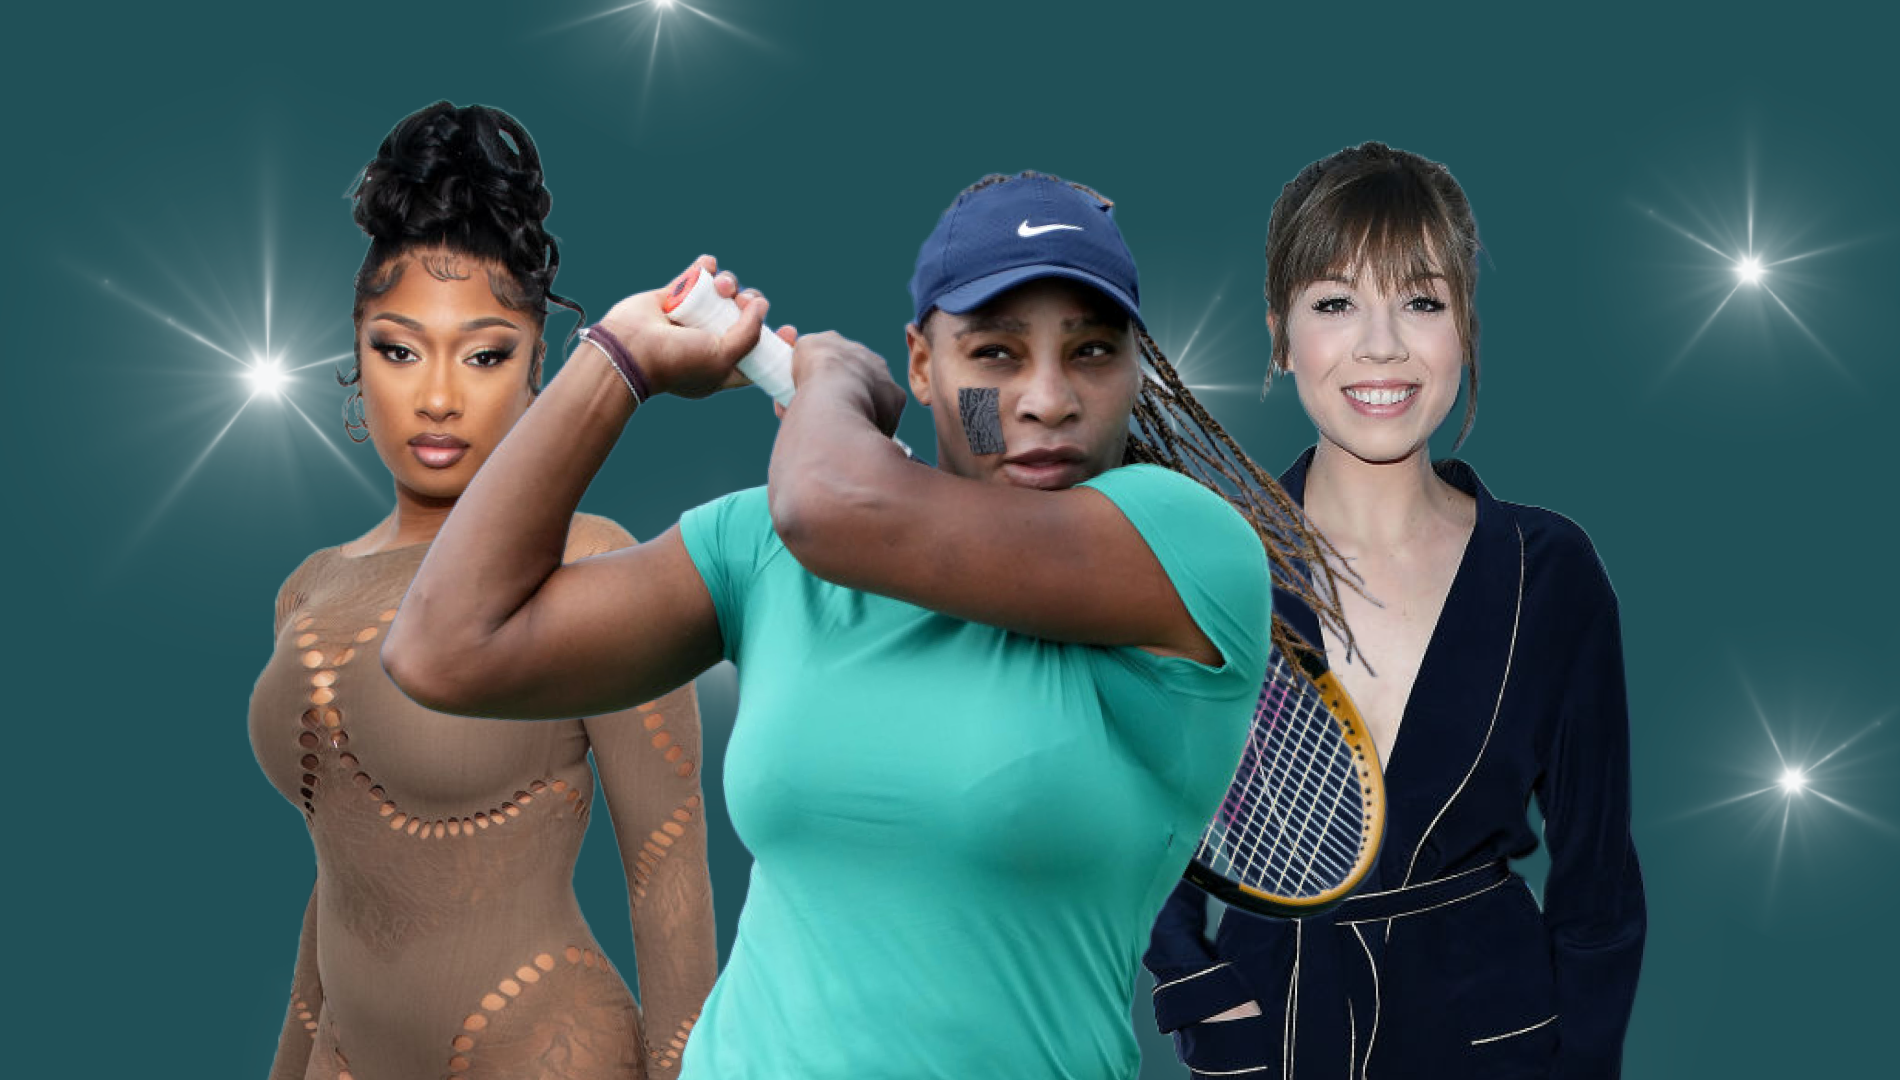 Pop Cultured with theSkimm promo image August 16, 2022 featuring Megan The Stallion, Serena Williams, and  Jennette McCurdy.